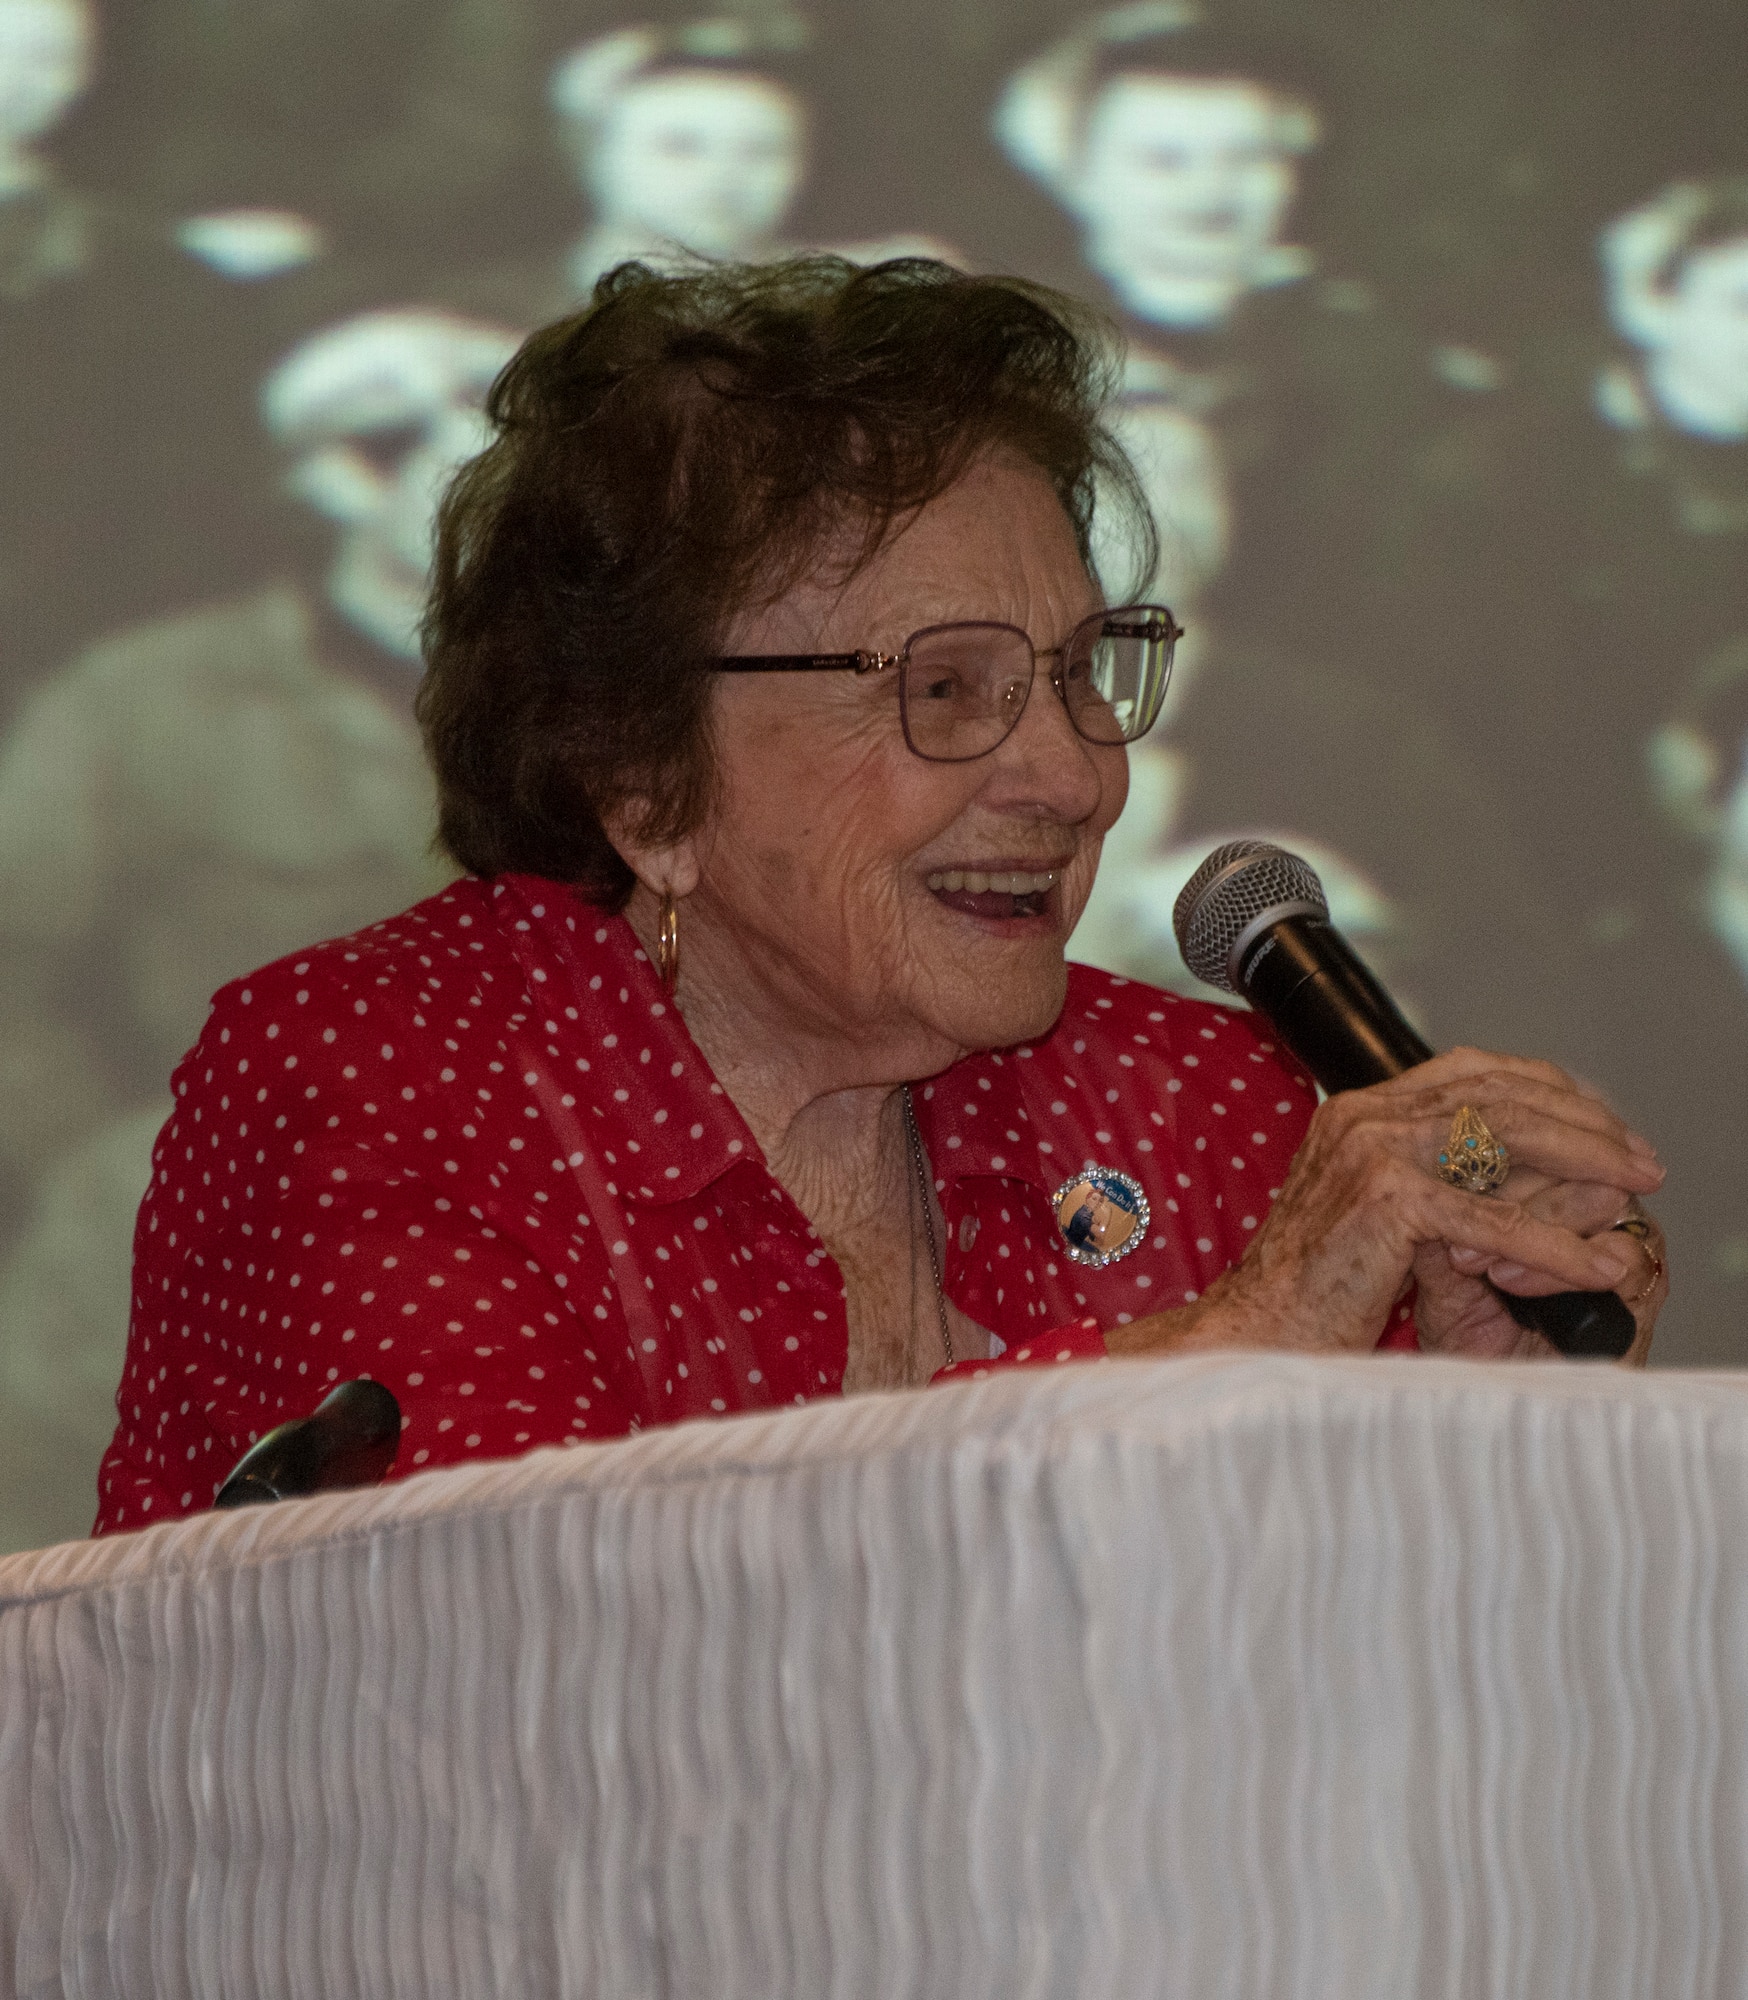 Agnes Moore, 99, journeyman welder from 1942-1945, delivers remarks during a base visit June 25, 2019, at Travis Air Force Base, California. Wynn, one of the original Rosie the Riveters, was at Travis AFB to share experiences with female maintainers assigned to the 60th Maintenance Group. Used in movies, newspapers, posters, photographs and articles, the Rosie the Riveter campaign stressed the patriotic need for women to enter the workforce during World War II. Though women filled many positions during the war, the aviation industry saw the greatest increase in female workers. (U.S. Air Force photo by Heide Couch)